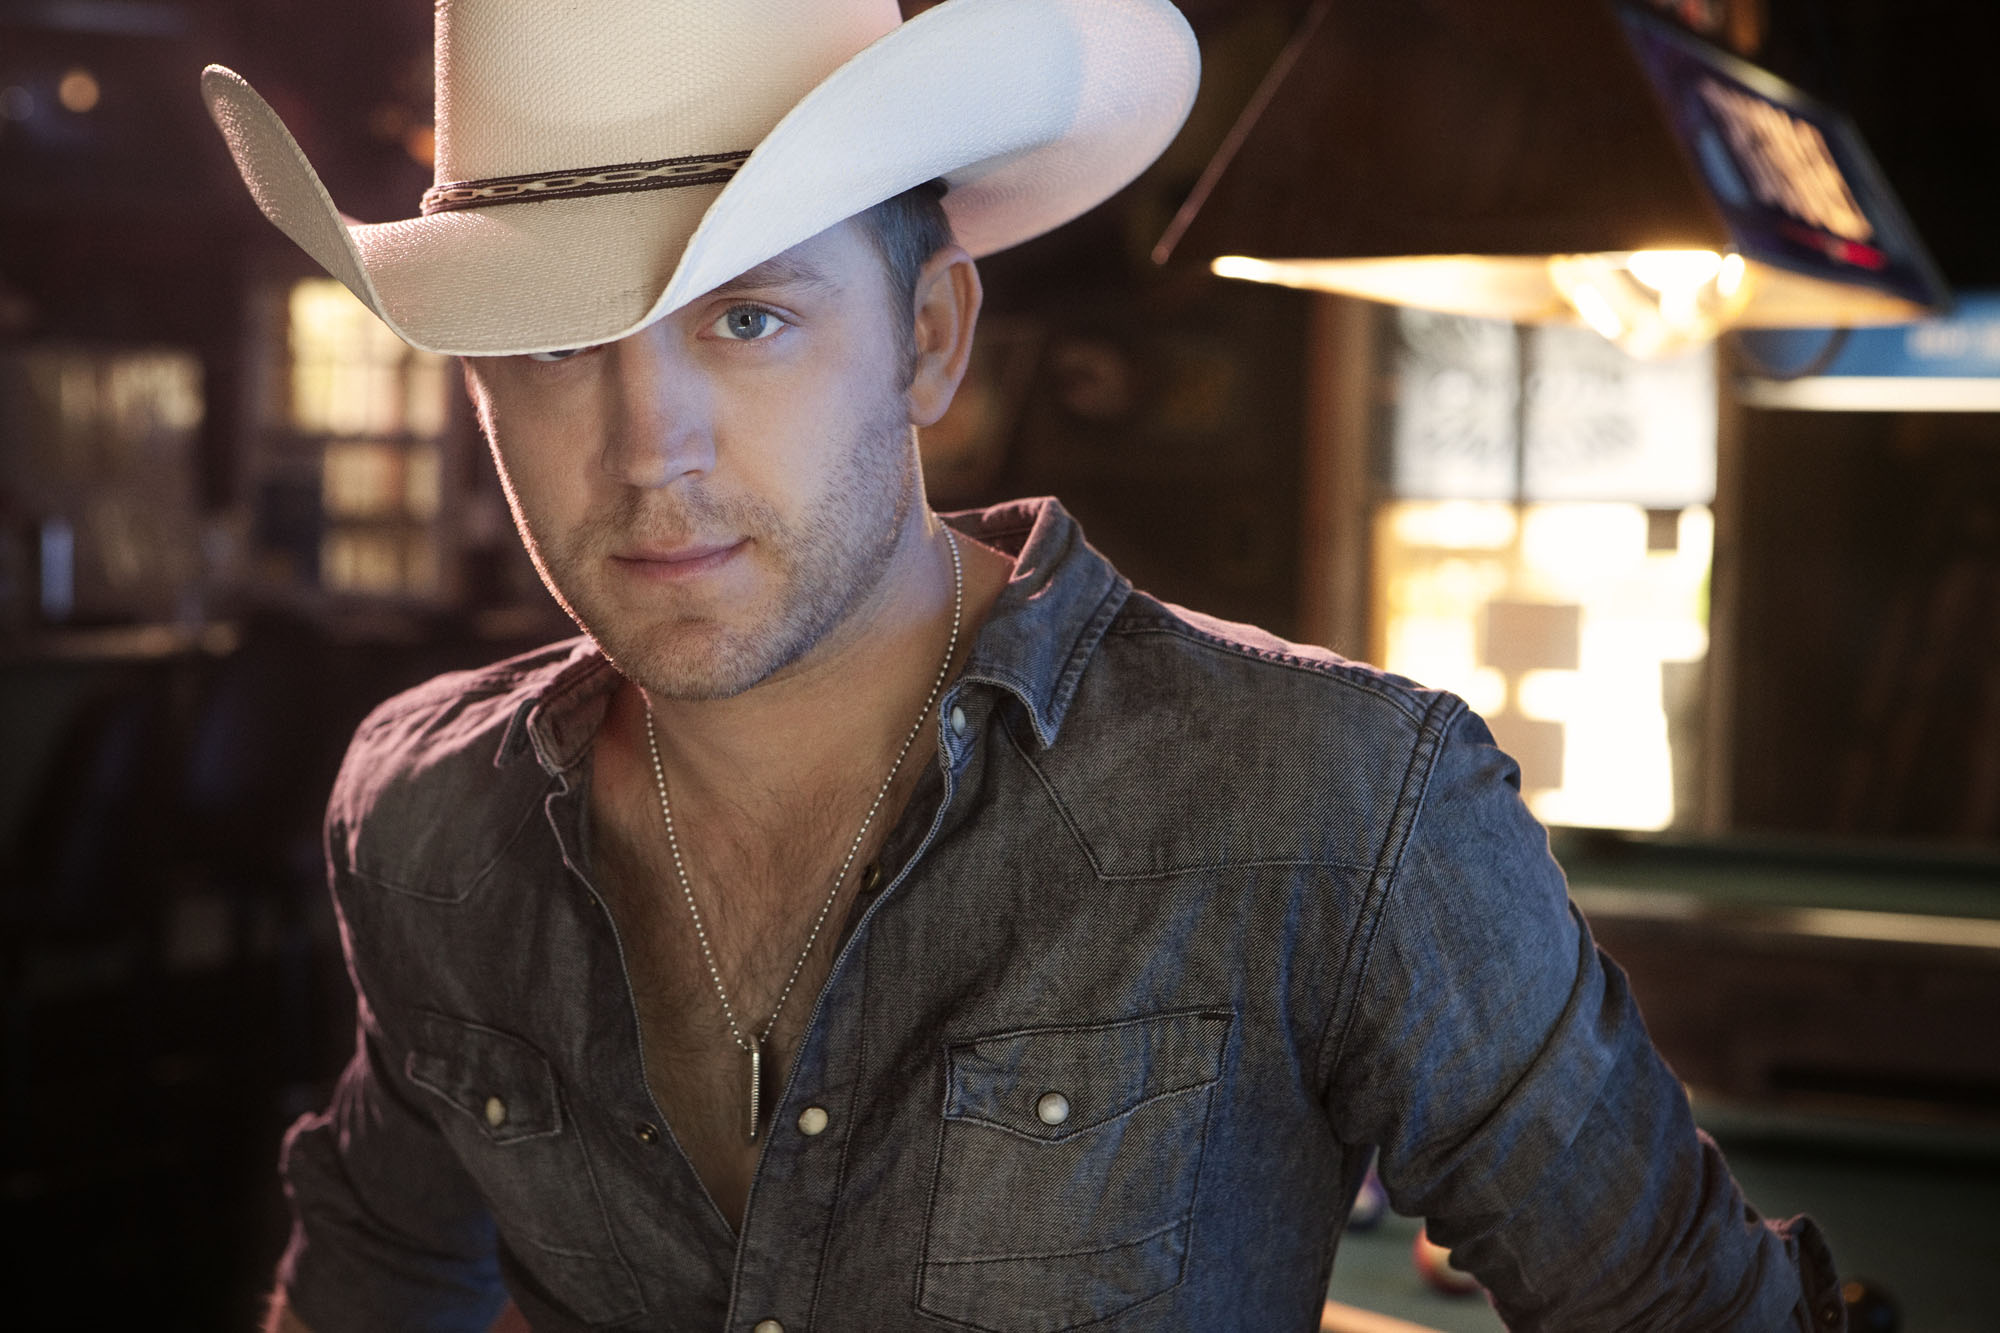 Justin Moore Backgrounds, Compatible - PC, Mobile, Gadgets| 2000x1333 px